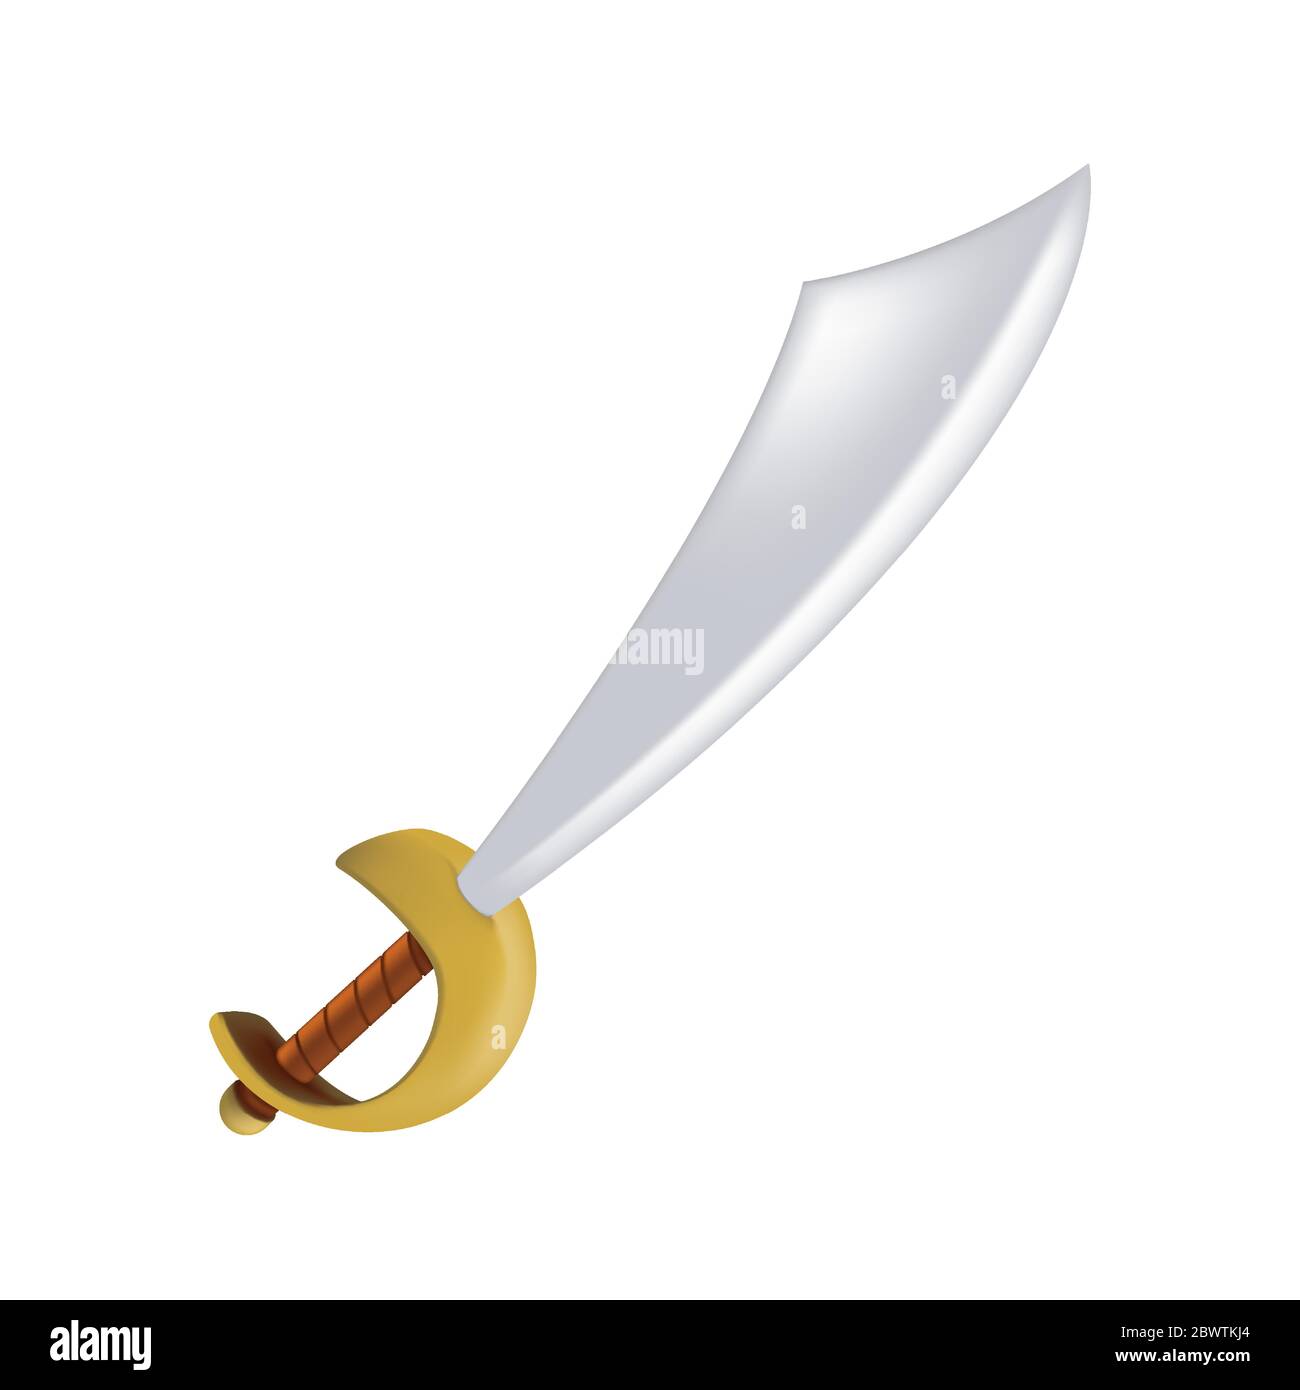 Antique pirate sabre with golden grip and steel blade. Vintage vector illustration of antique curve armed handle sword or sea bandit metal weapon isol Stock Vector